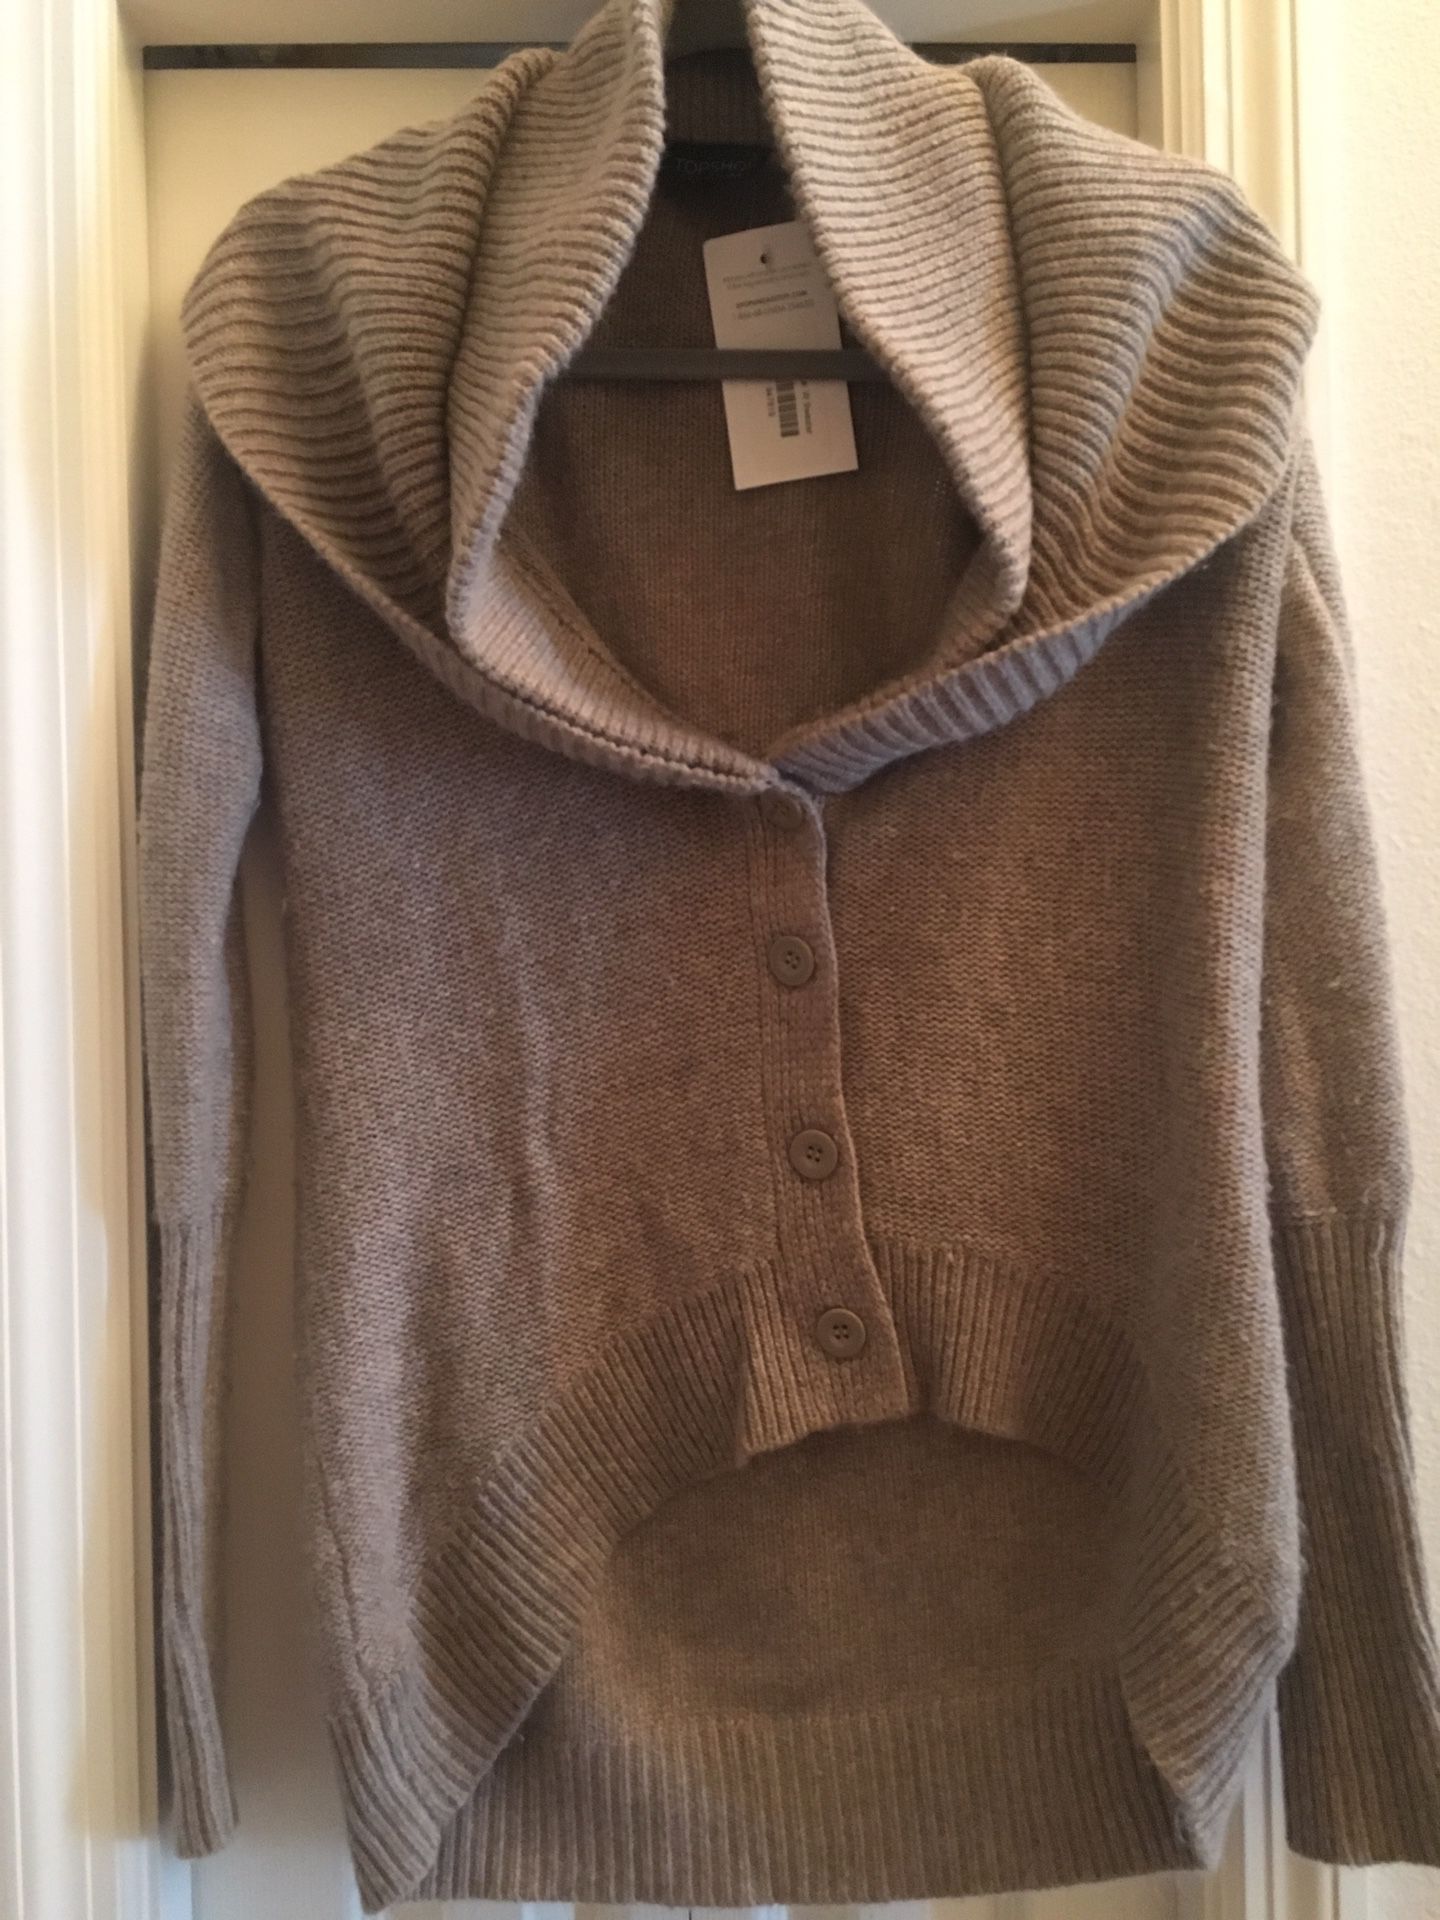 TOP SHOP Tan Taupe knit button cardigan Size Small